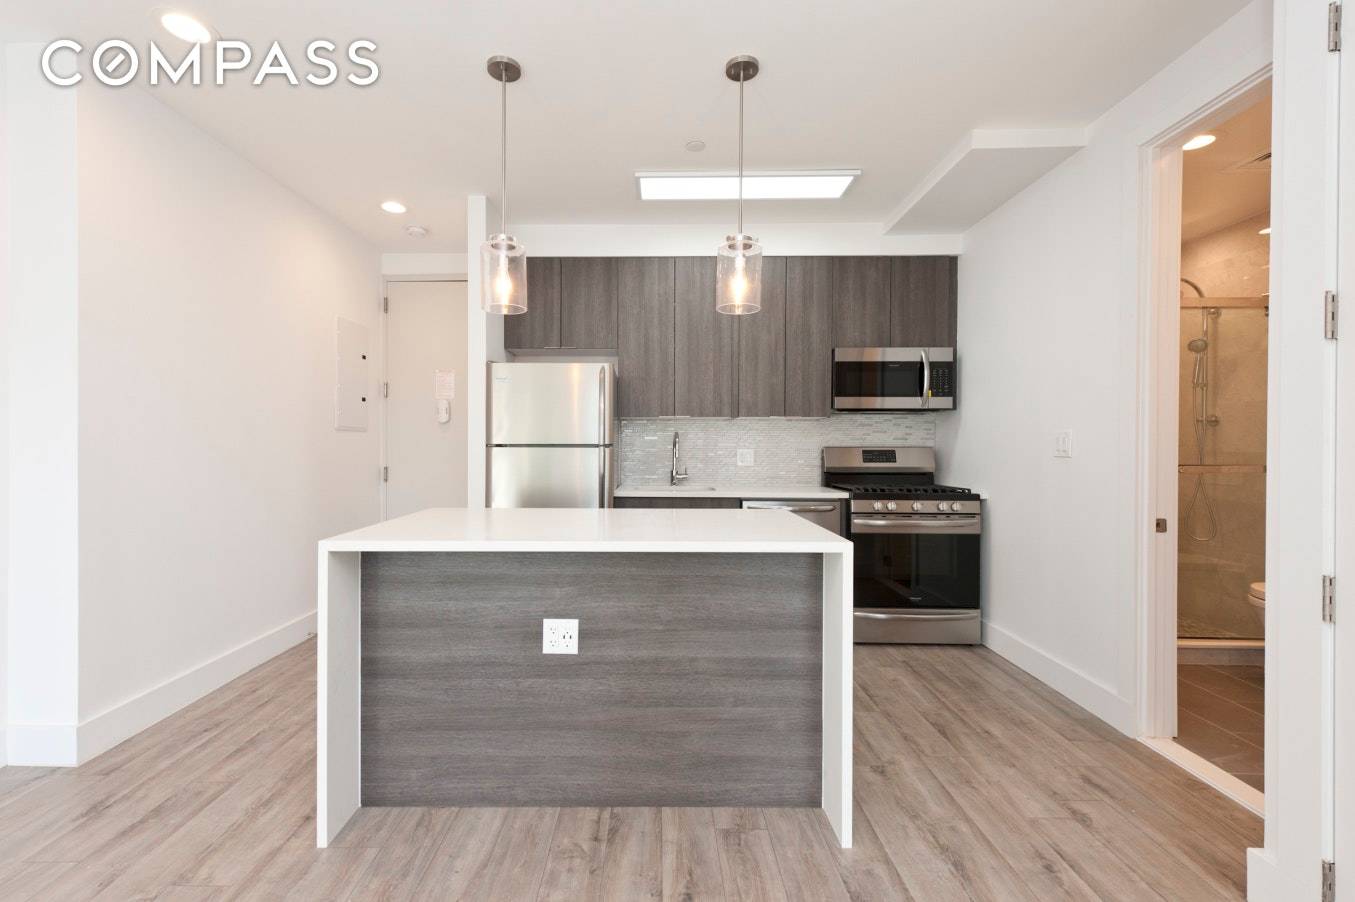 Brand spanking new building Next to Astoria Park South 1 bedroom apt on second floor Queen size bedroom Over sized windows Heated floors Walk in closet with custom built ins ...